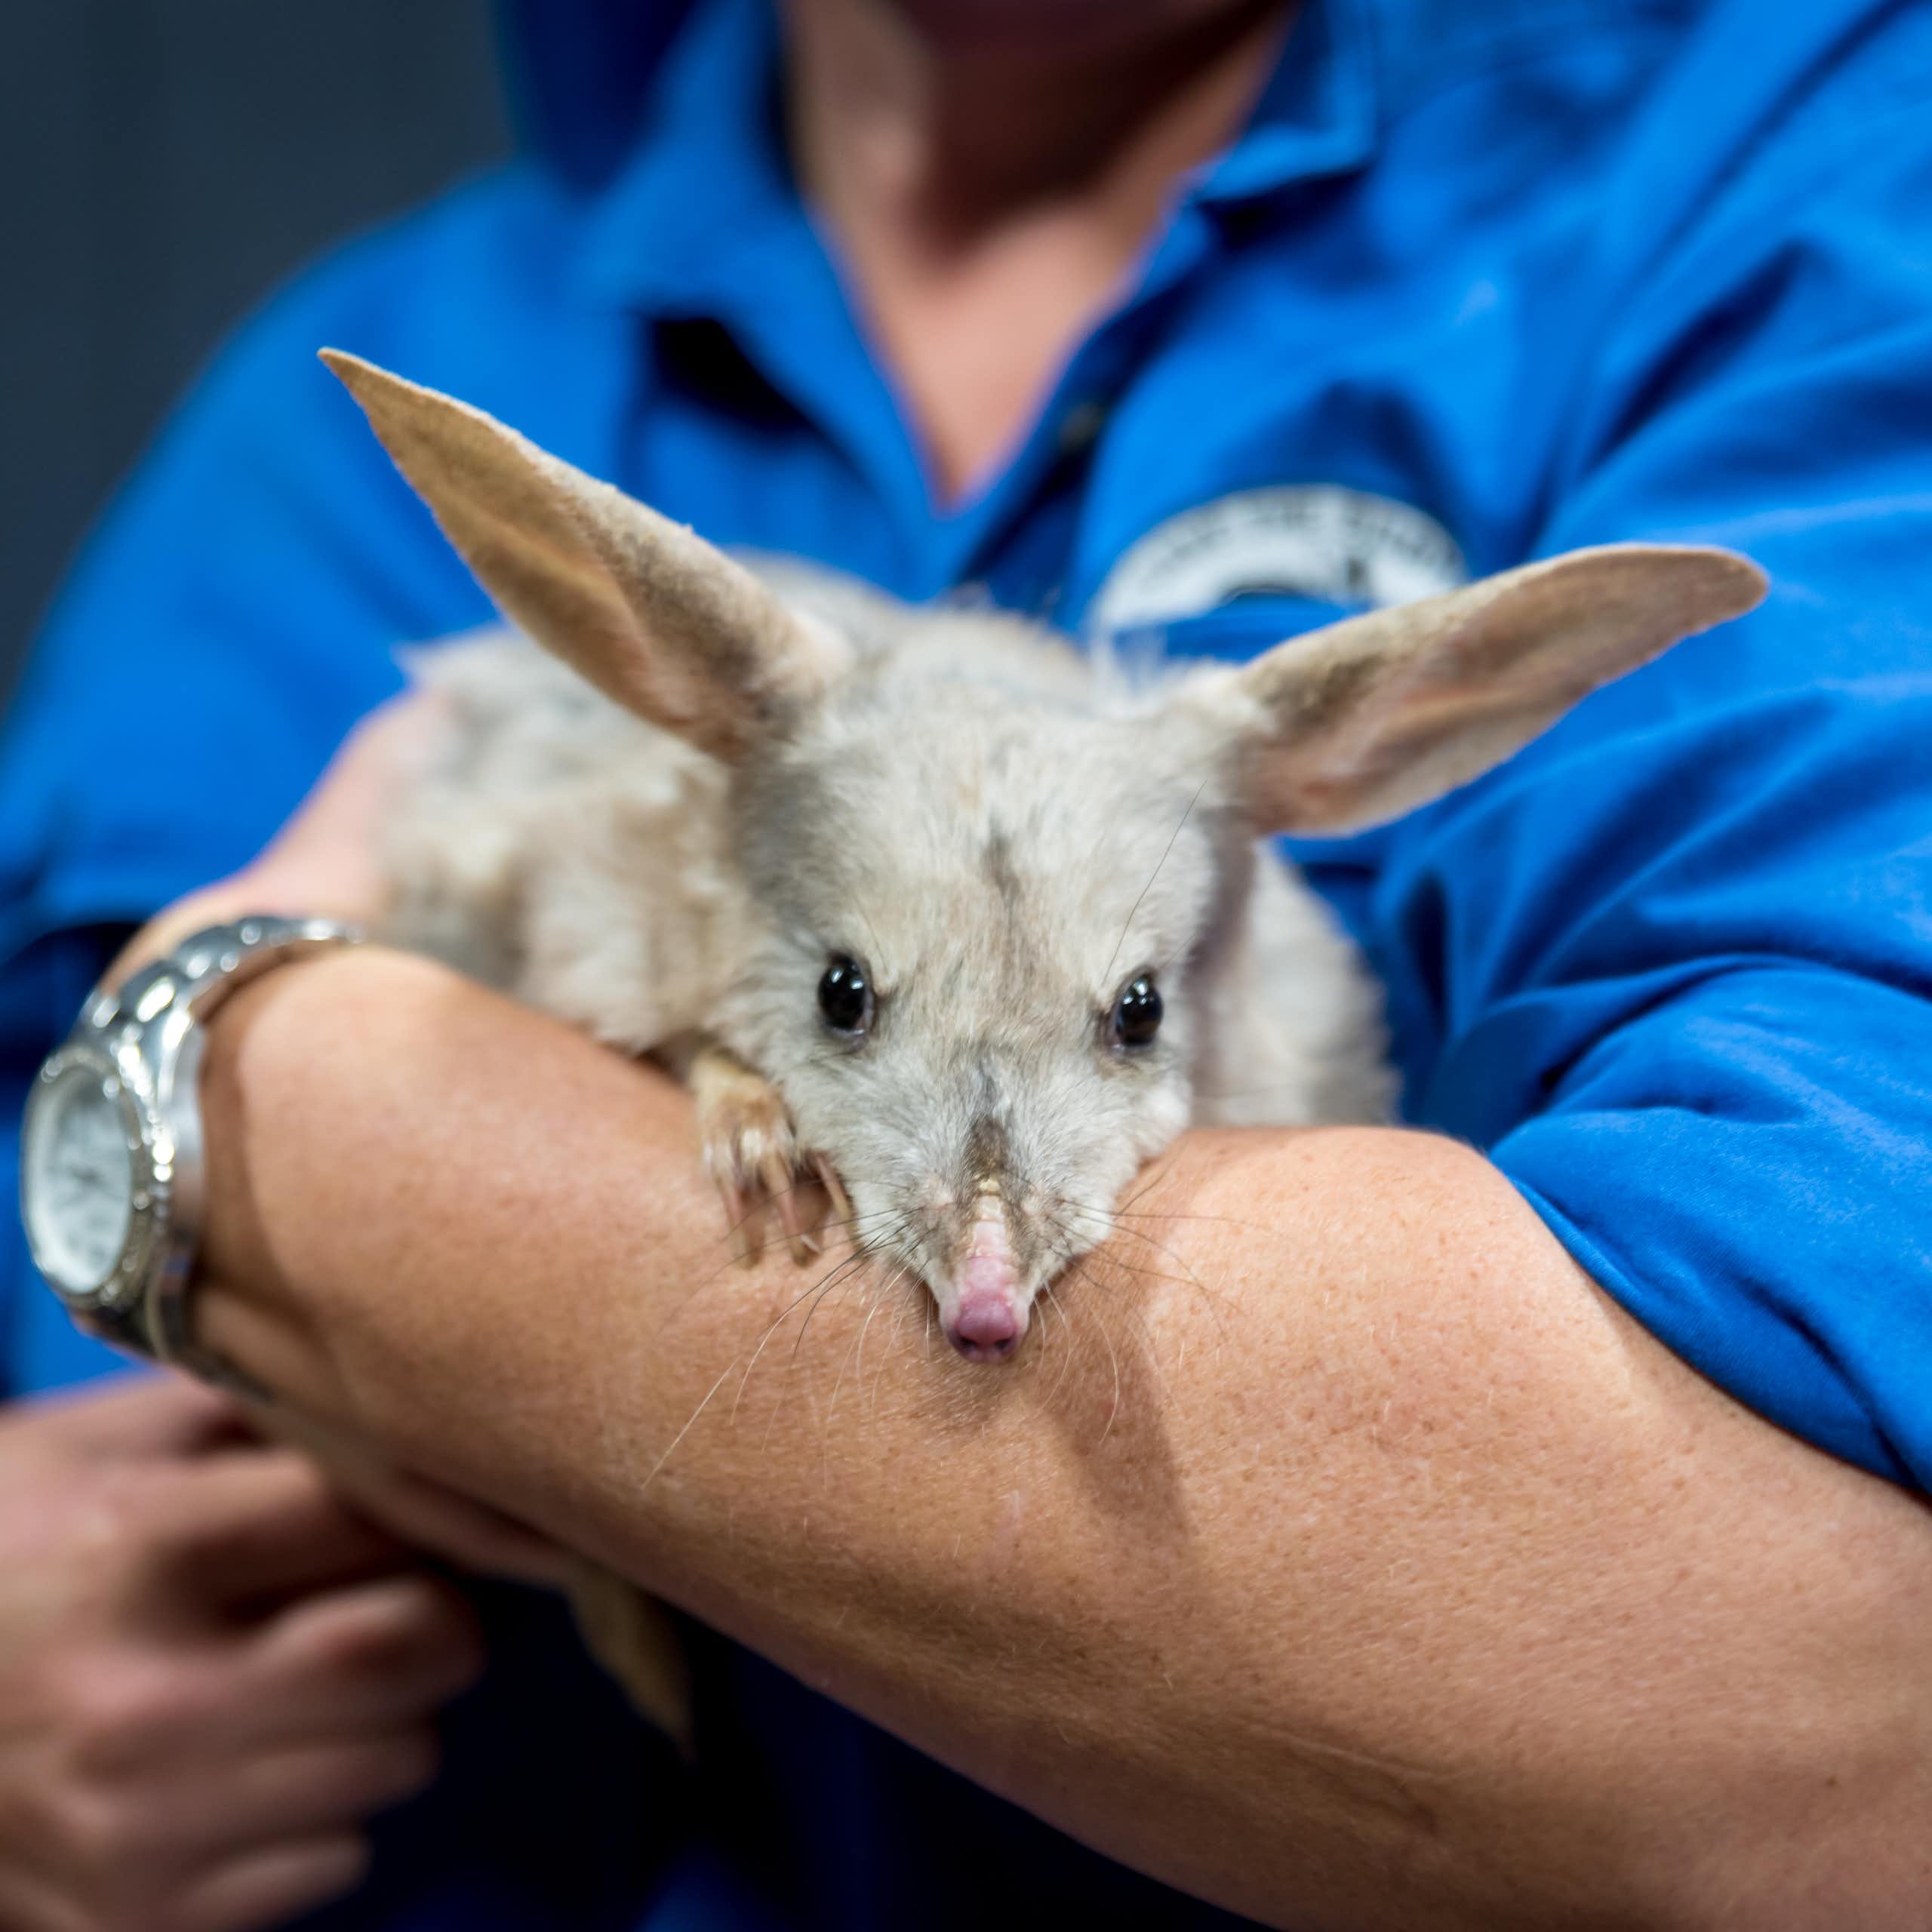 A person in a blue uniform shirt holds a grey animal with long ears looking curiously at the camera.